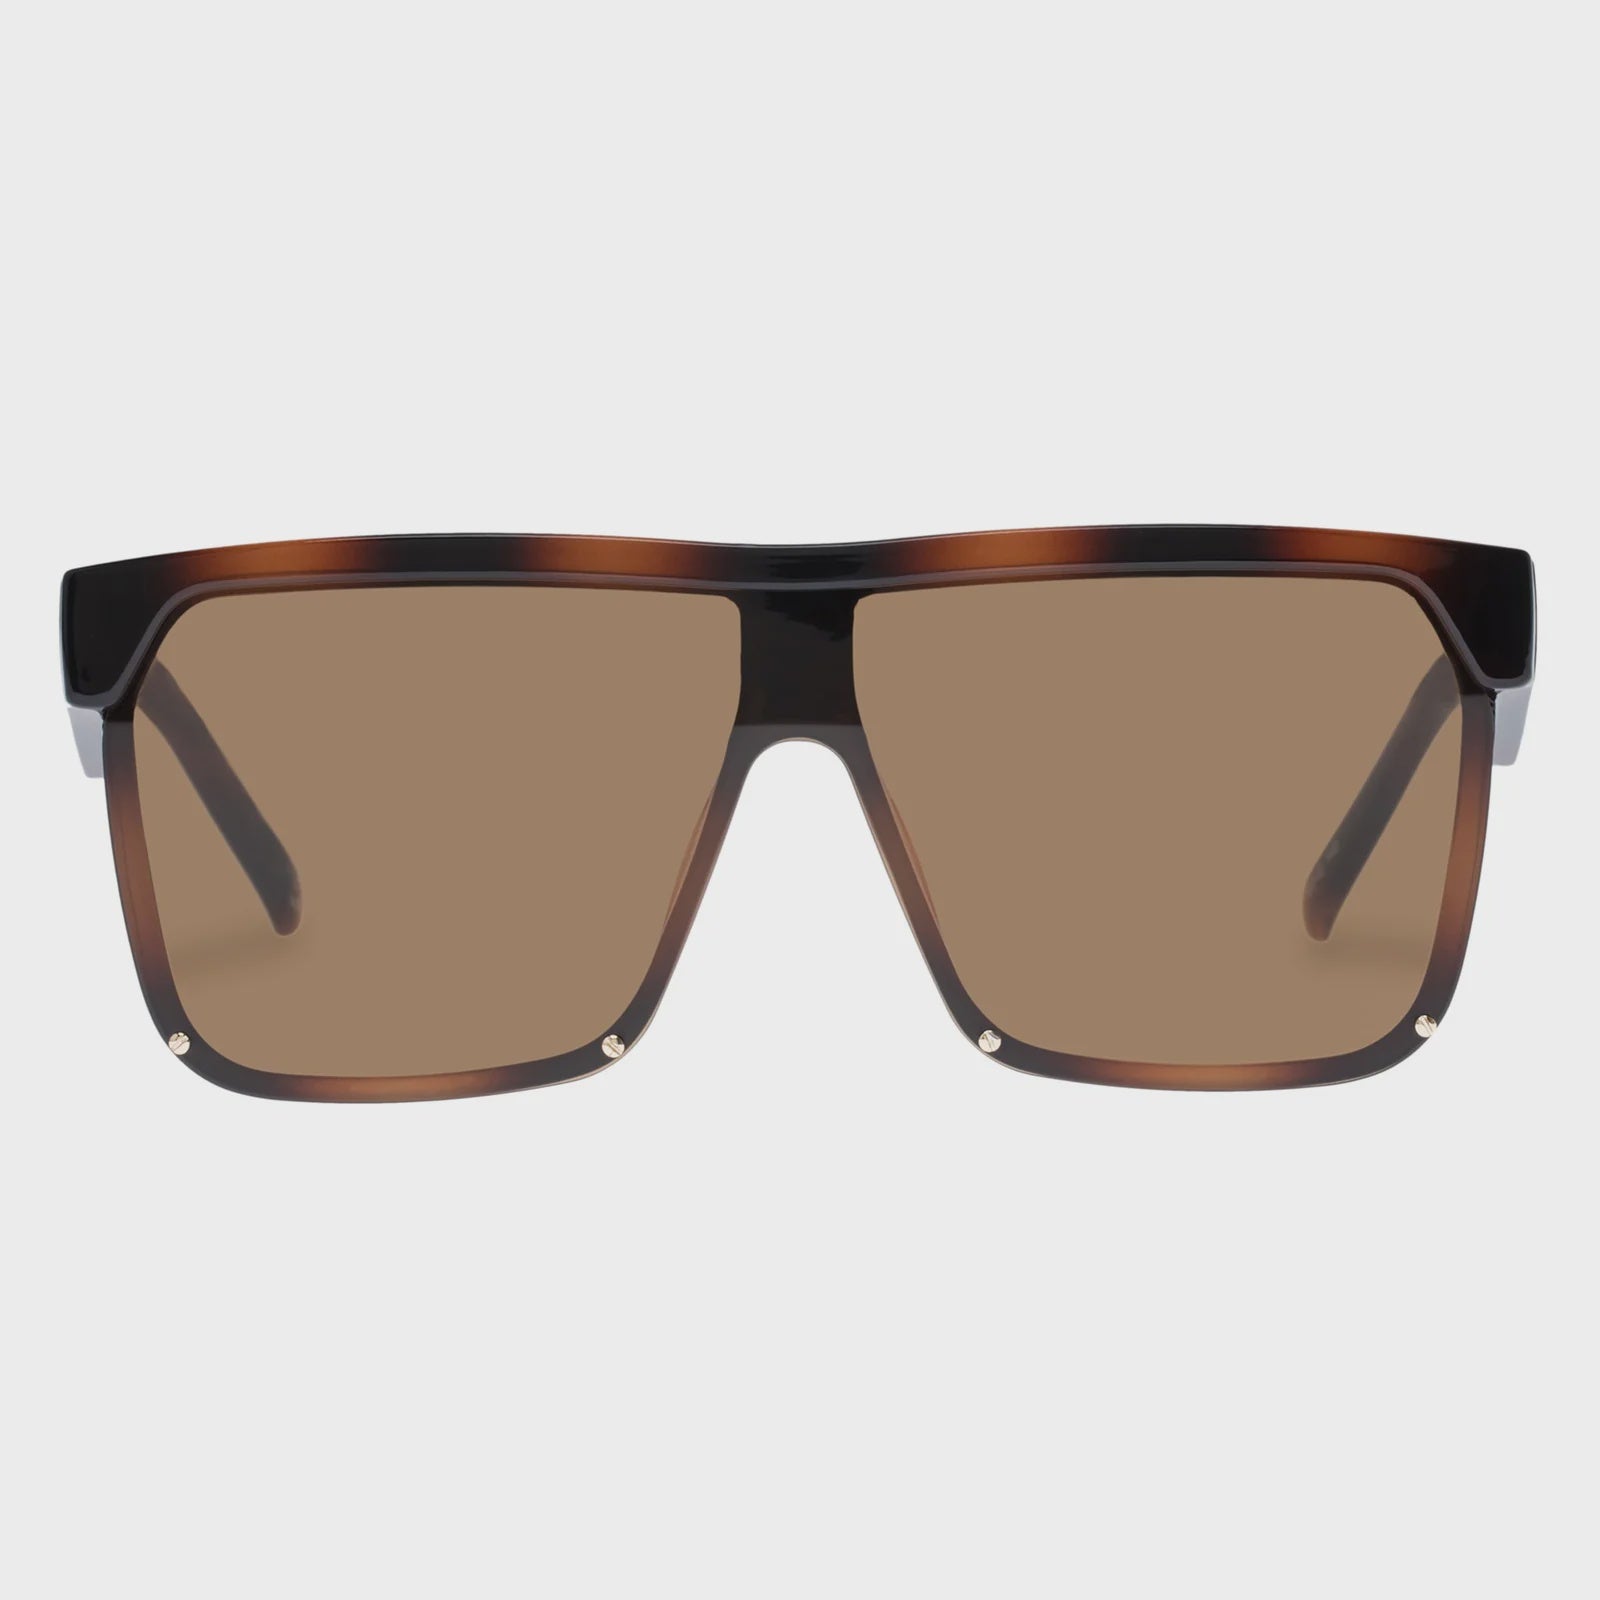 LE SPECS - THIRSTDAY SUNGLASSES IN TORT